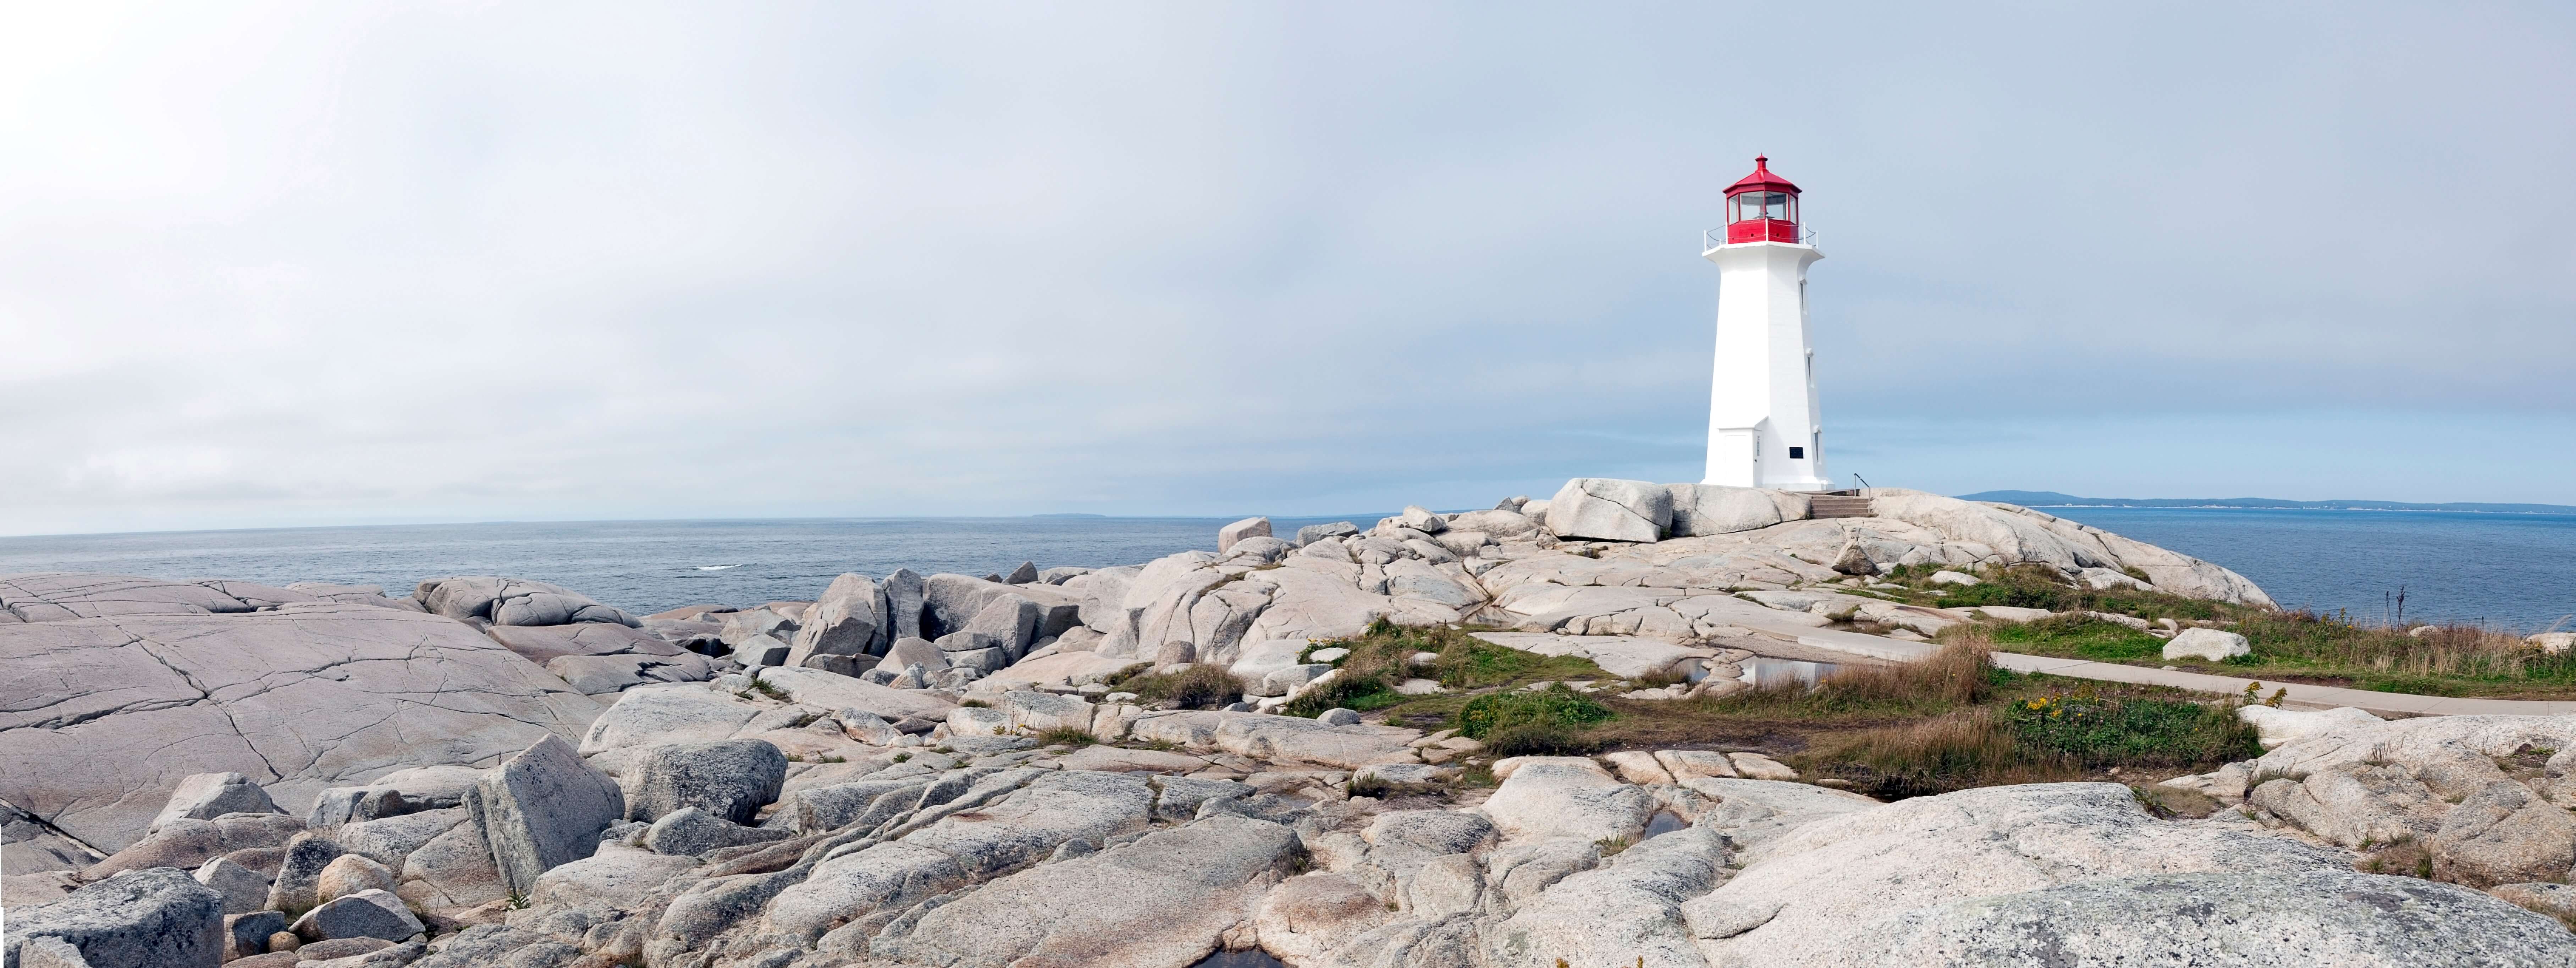 Image of light house on our Nova Scotia Chiropractic CE Blog post page